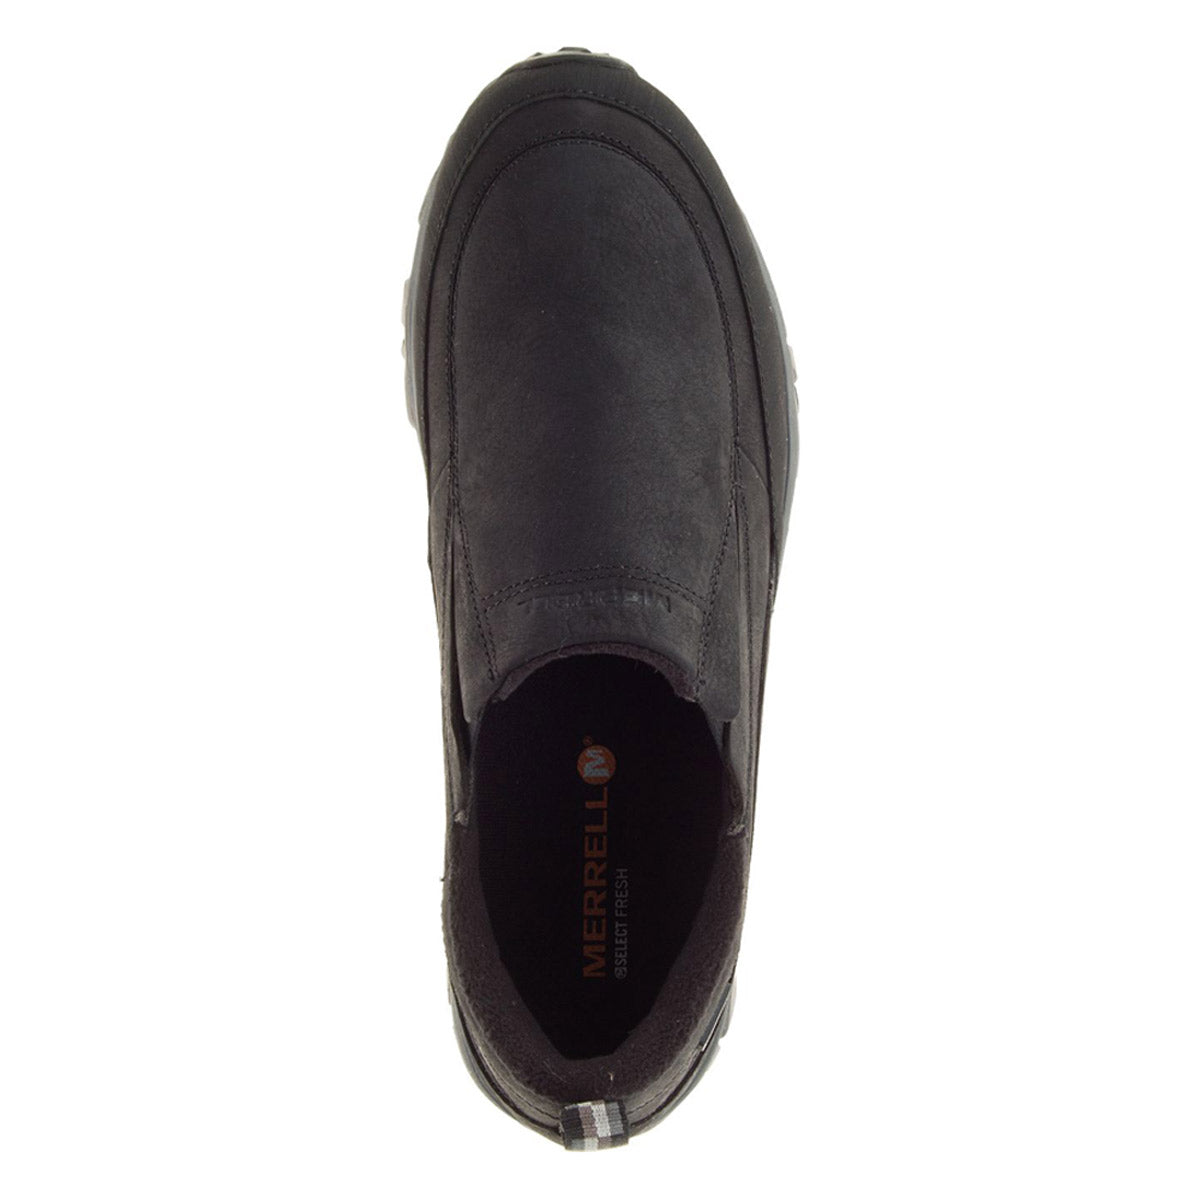 Top-down view of a black Merrell ColdPack Ice+ Moc waterproof slip-on shoe.